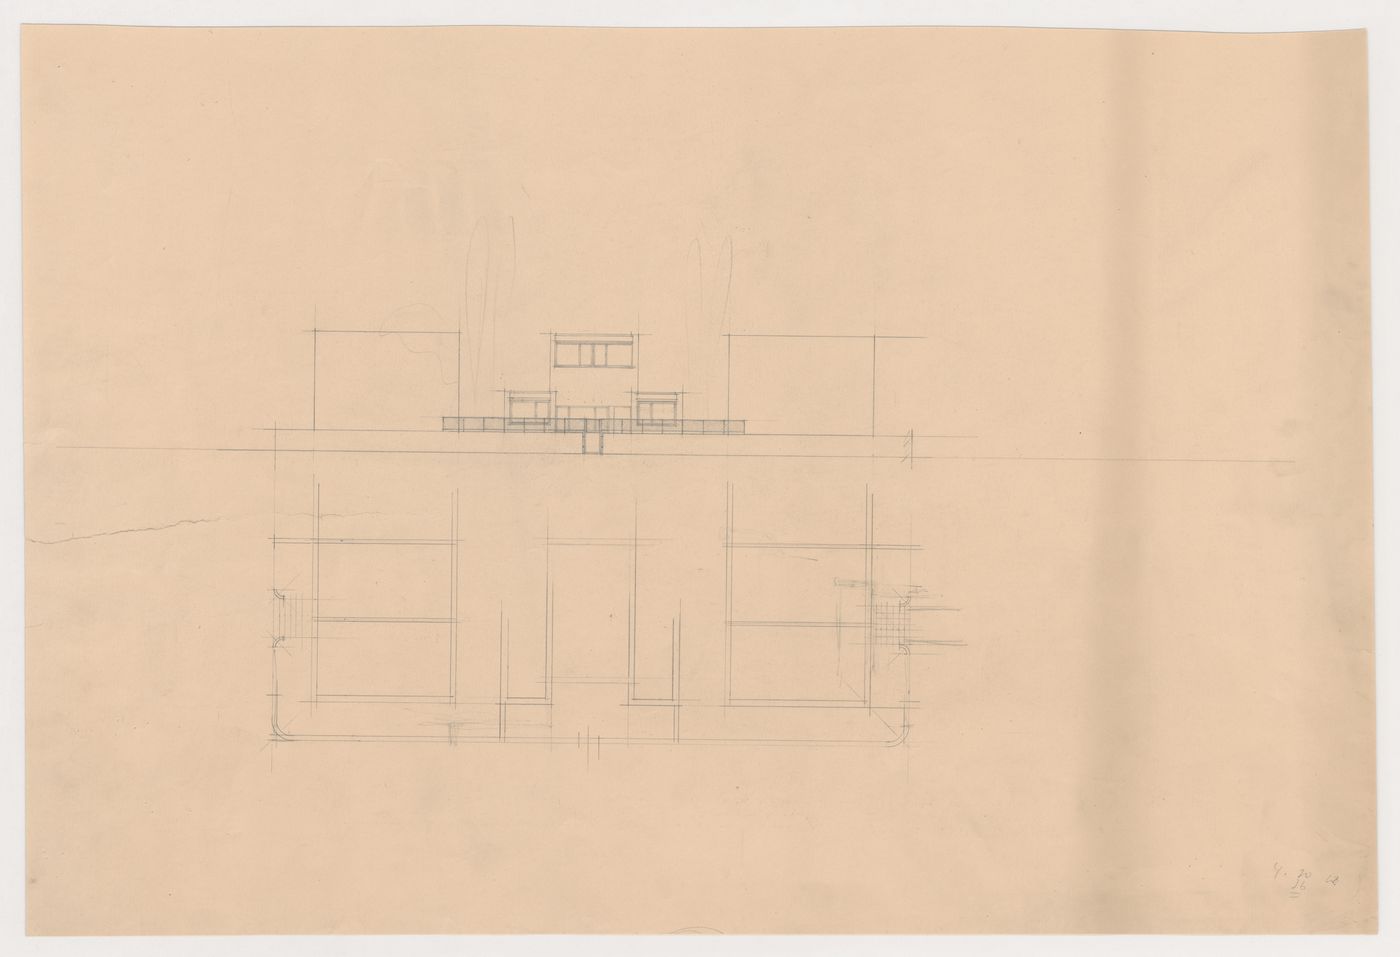 Elevation and plan for a housing [?] unit between two rows of housing units, Kiefhoek Housing Estate, Rotterdam, Netherlands